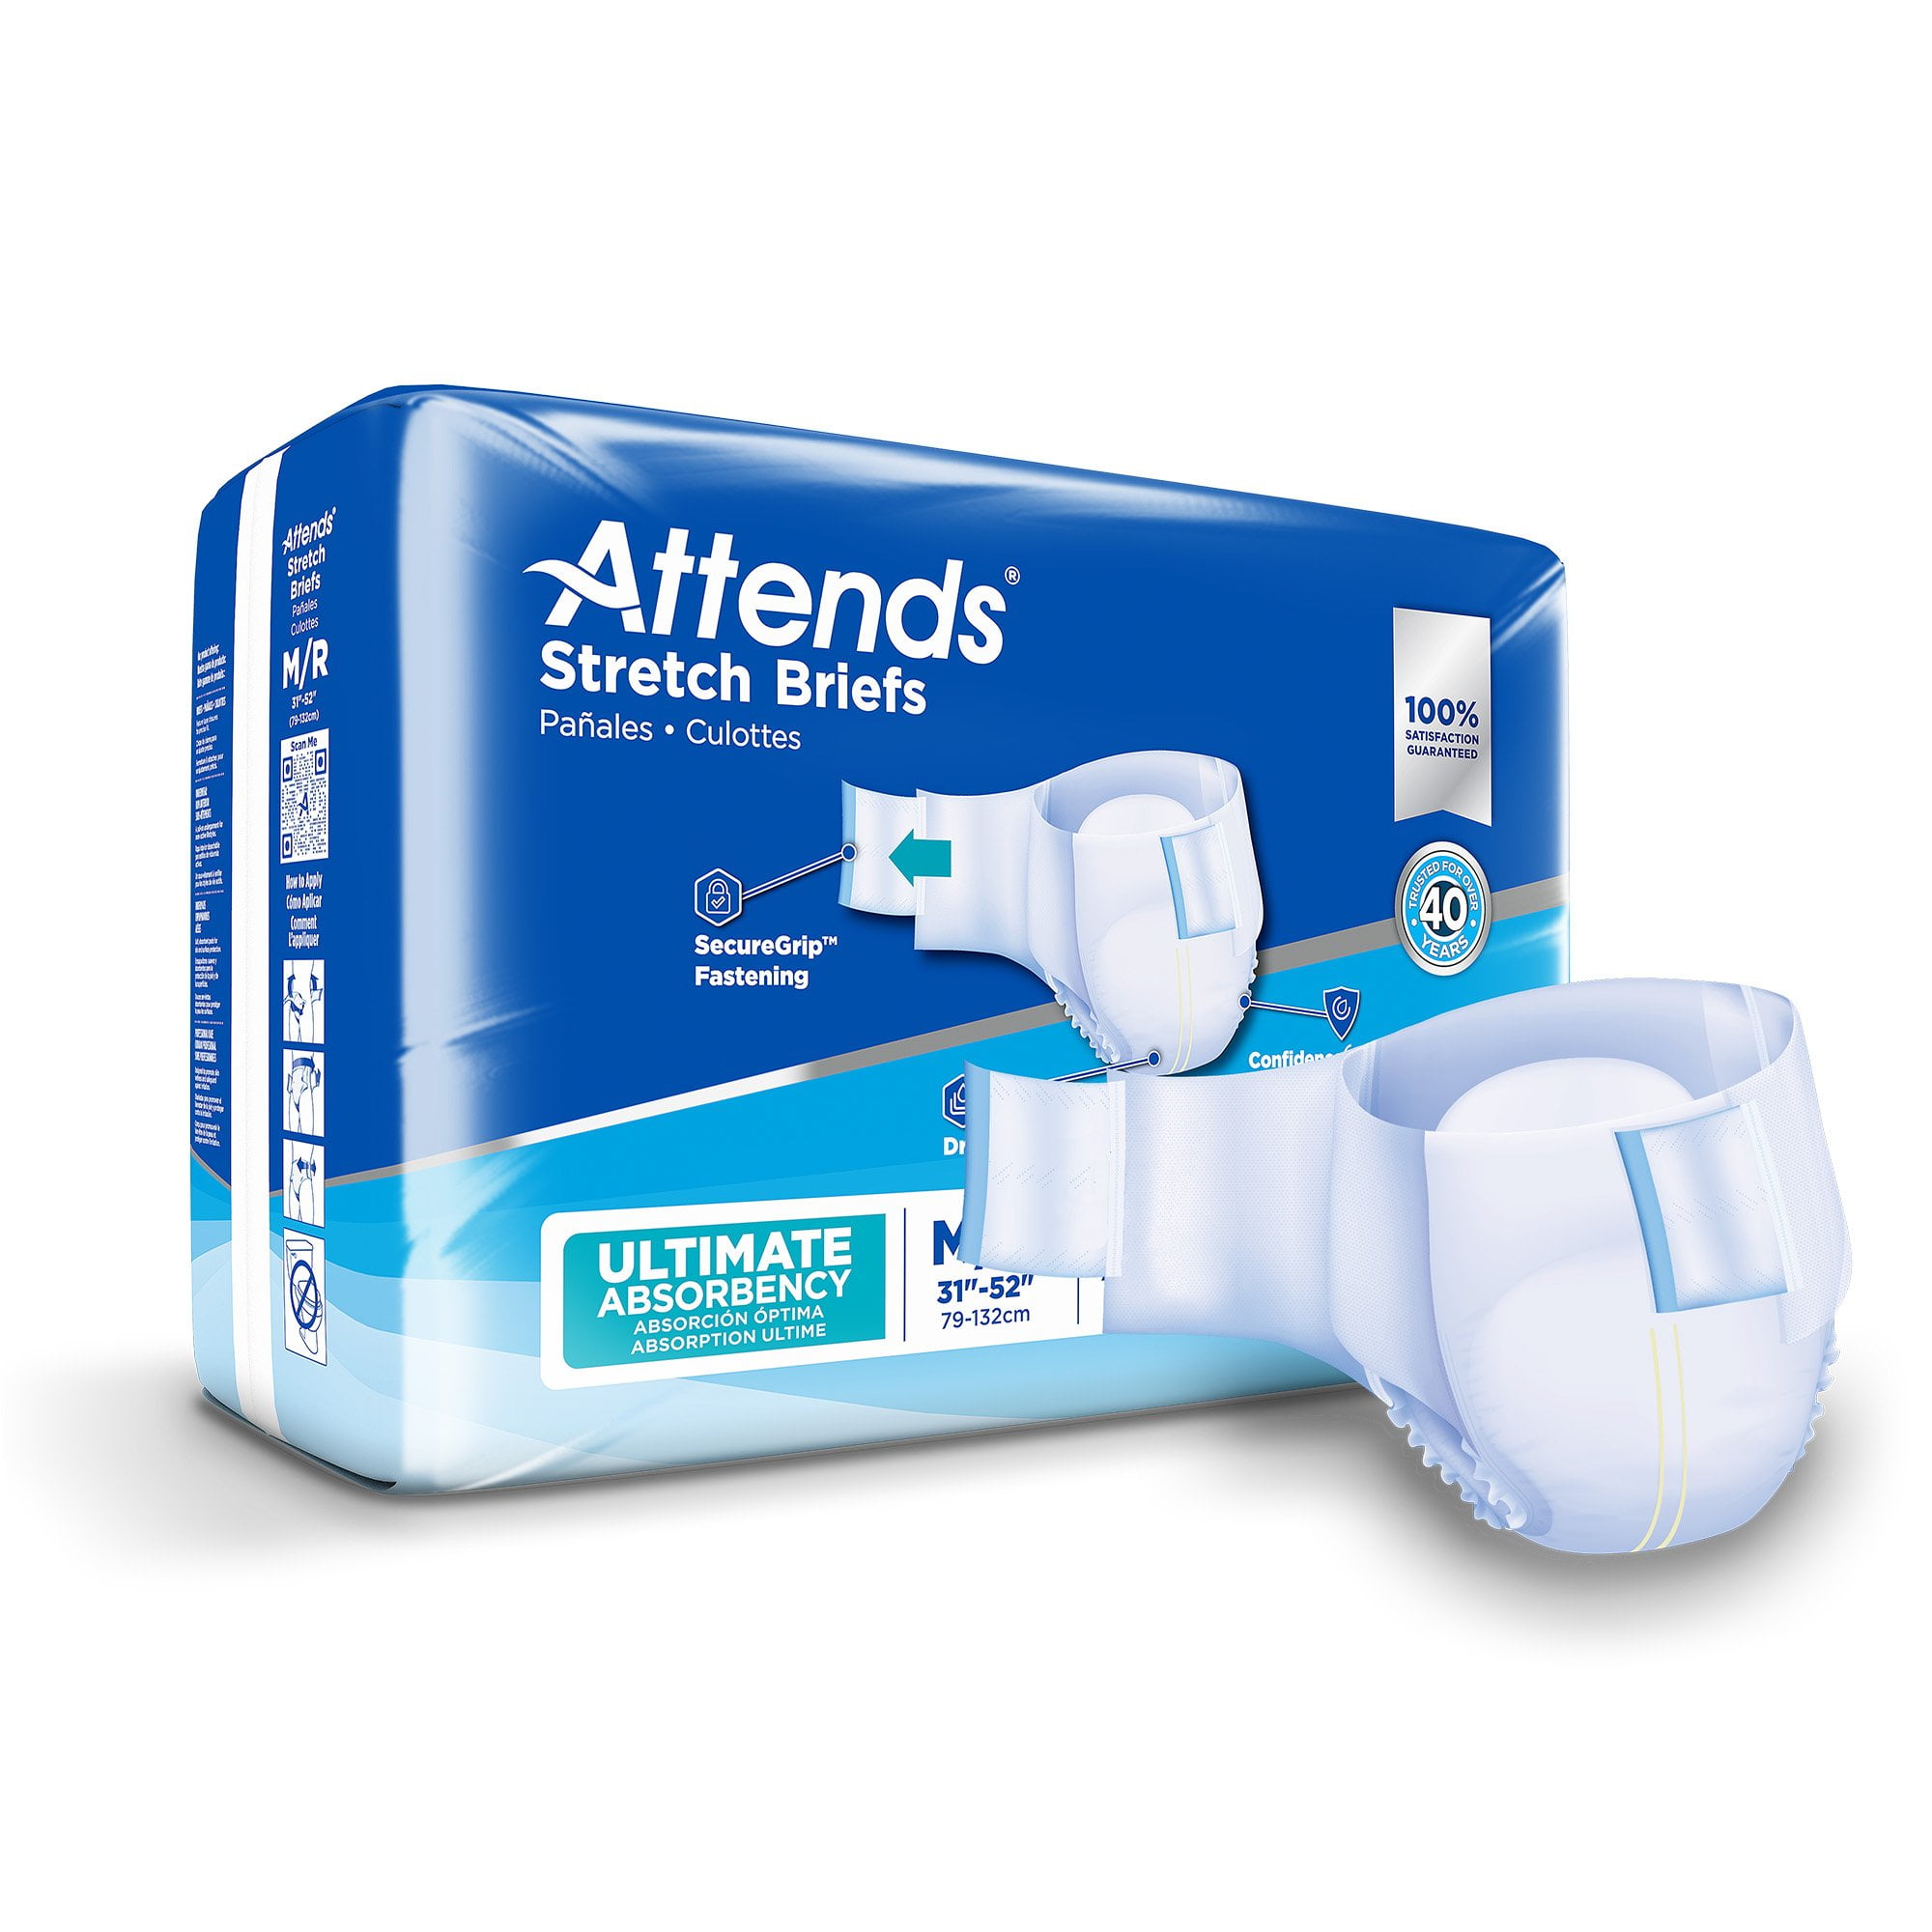 Attends Premier Adult Incontinence Brief L Heavy Absorbency Overnight,  ALI-BR30, Overnight, 48 Ct 